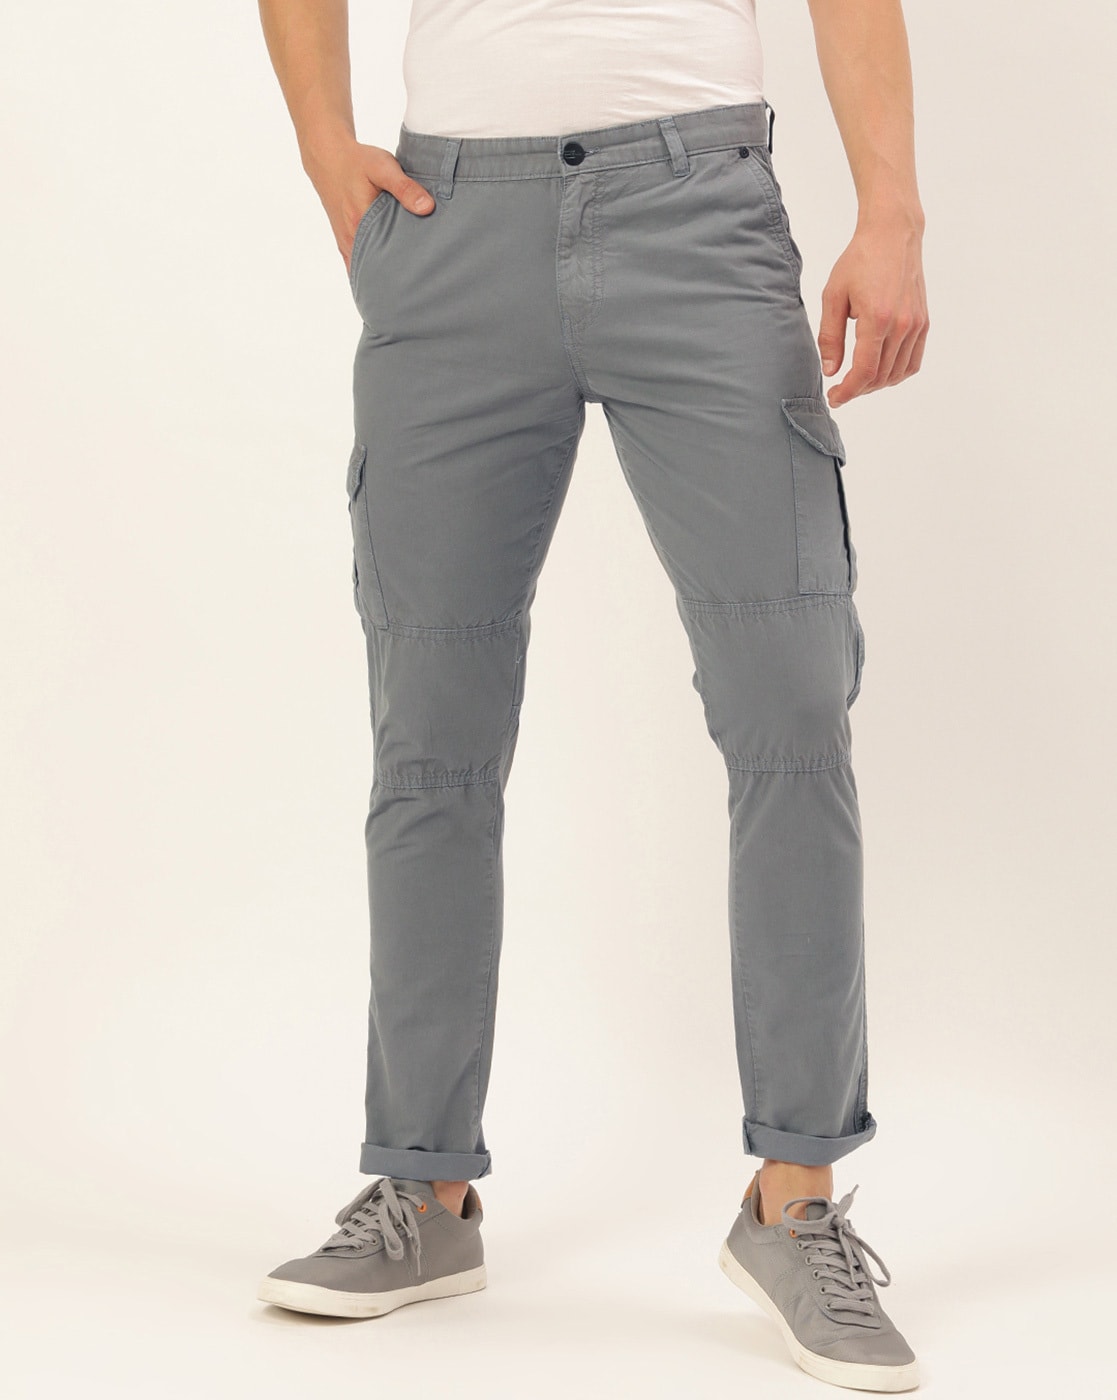 Mens Dark Green Color Comfortable Cargo Pants With Cotton Linen For Casual  Wear Length: 80 Inch (in) at Best Price in Surat | Rebel Trading Co.